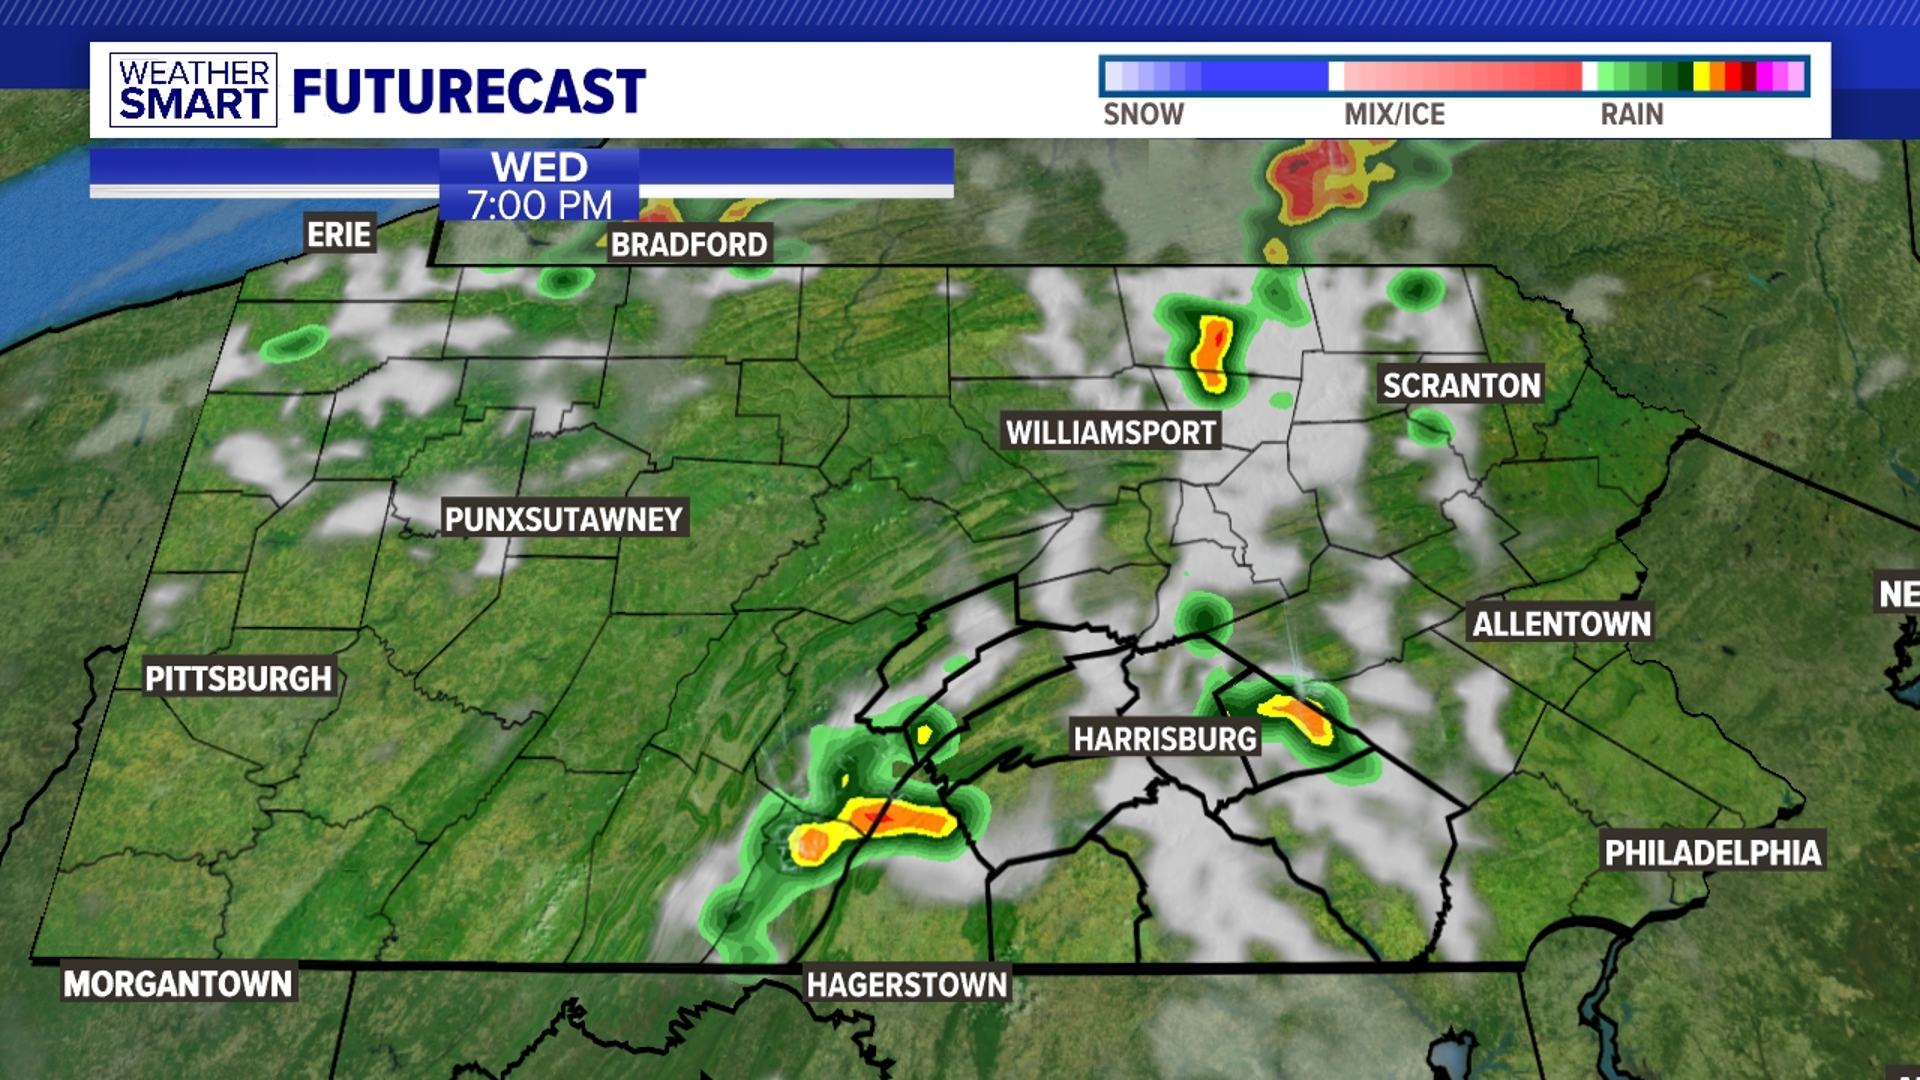 A few showers and storms return Wednesday, Thursday and into the holiday weekend. It's not a complete washout.